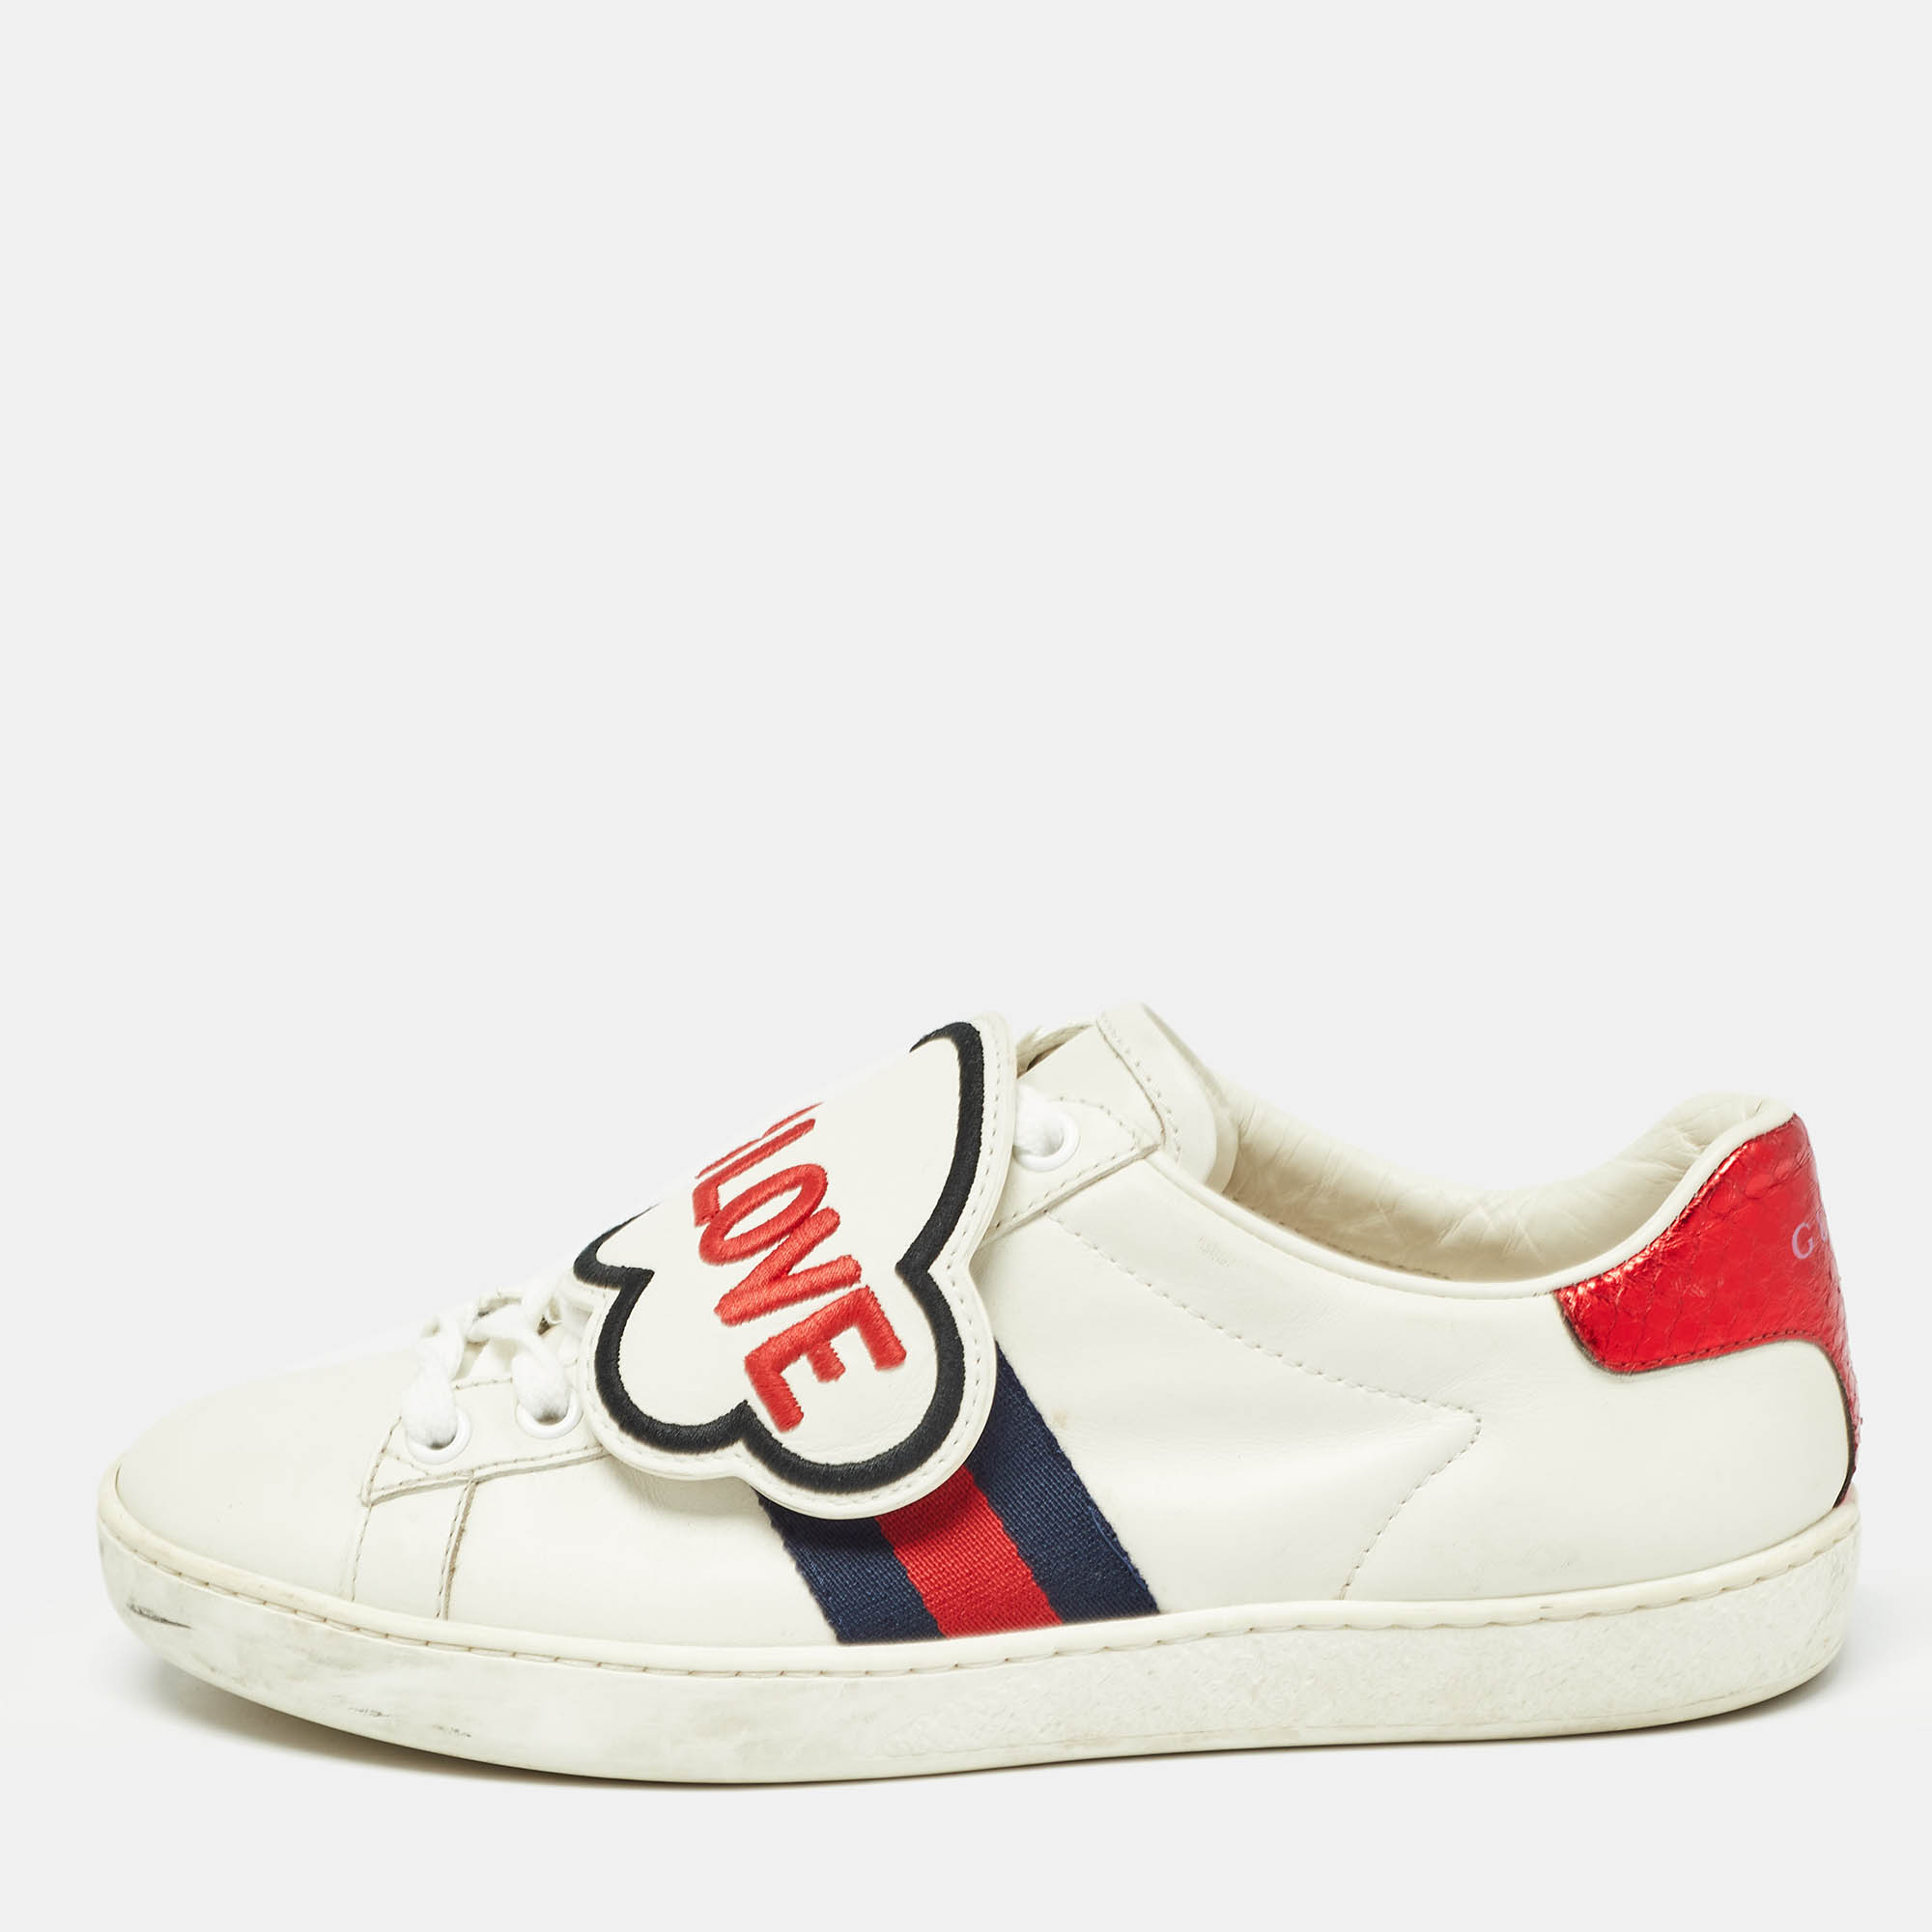 Gucci white/red leather love ace sneakers size 36